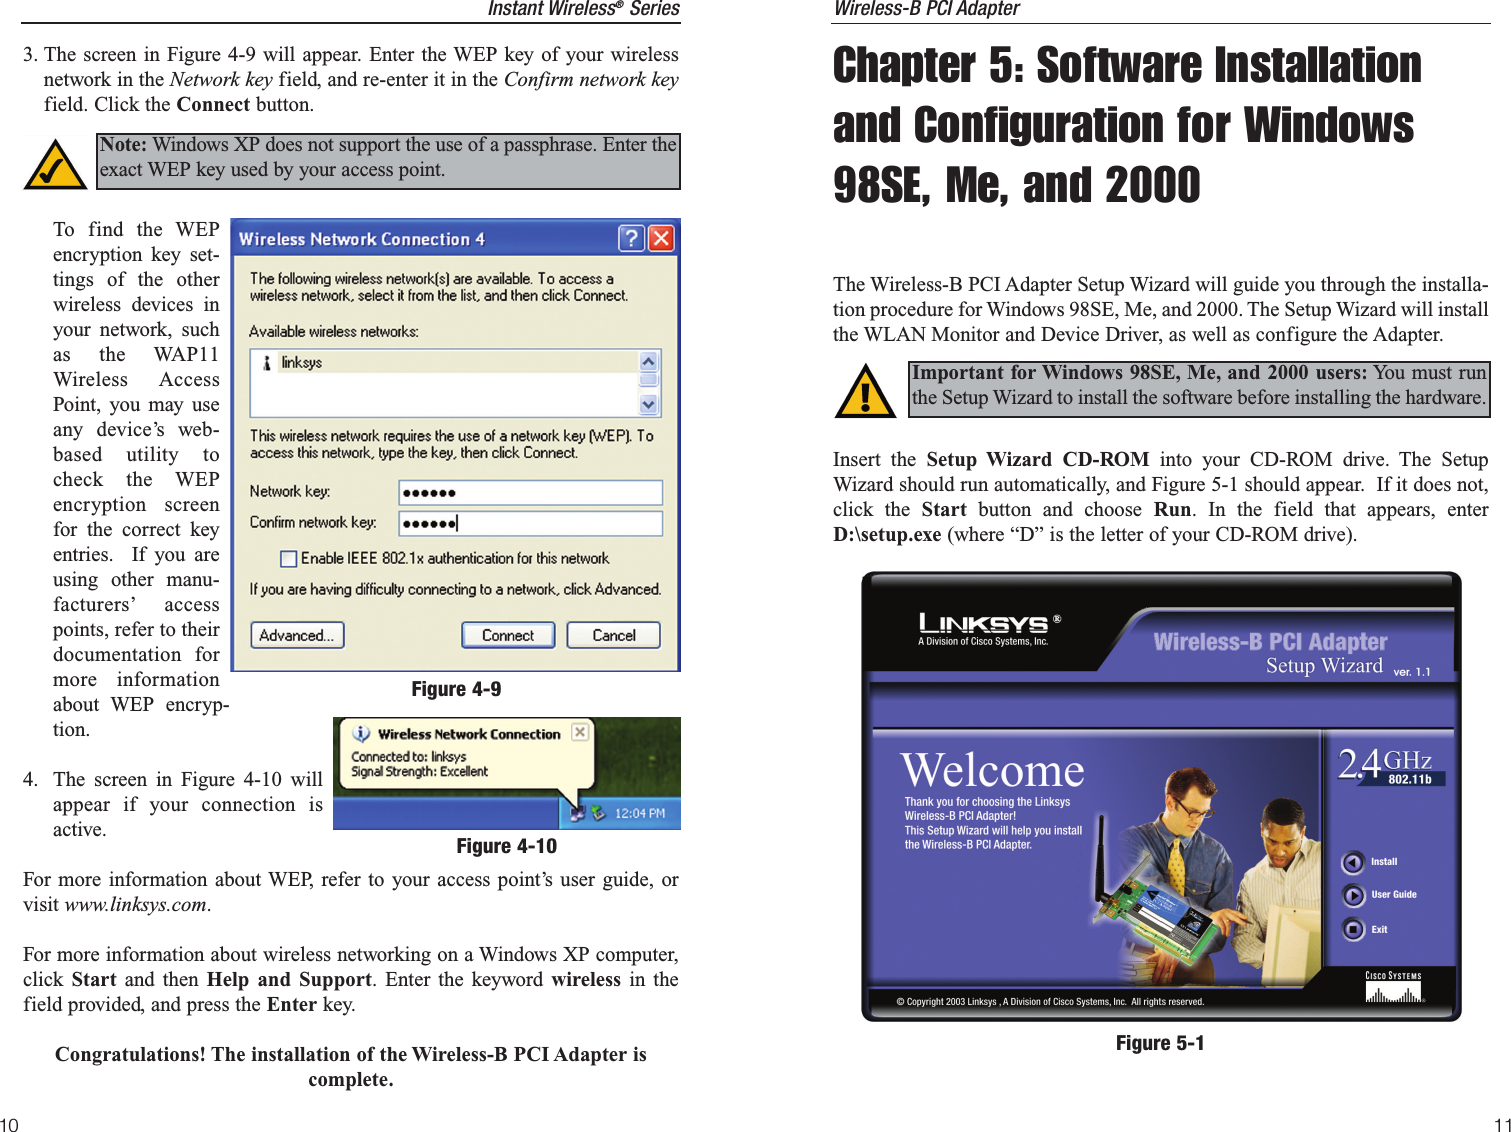 11Instant Wireless®Series10Wireless-B PCI AdapterChapter 5: Software Installationand Configuration for Windows98SE, Me, and 2000The Wireless-B PCI Adapter Setup Wizard will guide you through the installa-tion procedure for Windows 98SE, Me, and 2000. The Setup Wizard will installthe WLAN Monitor and Device Driver, as well as configure the Adapter.Insert the Setup Wizard CD-ROM into your CD-ROM drive. The SetupWizard should run automatically, and Figure 5-1 should appear.  If it does not,click the Start  button and choose Run. In the field that appears, enterD:\setup.exe (where “D” is the letter of your CD-ROM drive).  Important for Windows 98SE, Me, and 2000 users: You must runthe Setup Wizard to install the software before installing the hardware.Figure 5-13. The screen in Figure 4-9 will appear. Enter the WEP key of your wirelessnetwork in the Network key field, and re-enter it in the Confirm network keyfield. Click the Connect button.To find the WEPencryption key set-tings of the otherwireless devices inyour network, suchas the WAP11Wireless AccessPoint, you may useany device’s web-based utility tocheck the WEPencryption screenfor the correct keyentries.  If you areusing other manu-facturers’ accesspoints, refer to theirdocumentation formore informationabout WEP encryp-tion. 4. The screen in Figure 4-10 willappear if your connection isactive.For more information about WEP, refer to your access point’s user guide, orvisit www.linksys.com.For more information about wireless networking on a Windows XP computer,click  Start and then Help and Support. Enter the keyword wireless in thefield provided, and press the Enter key.Congratulations! The installation of the Wireless-B PCI Adapter iscomplete.Figure 4-9Note: Windows XP does not support the use of a passphrase. Enter theexact WEP key used by your access point.Figure 4-10